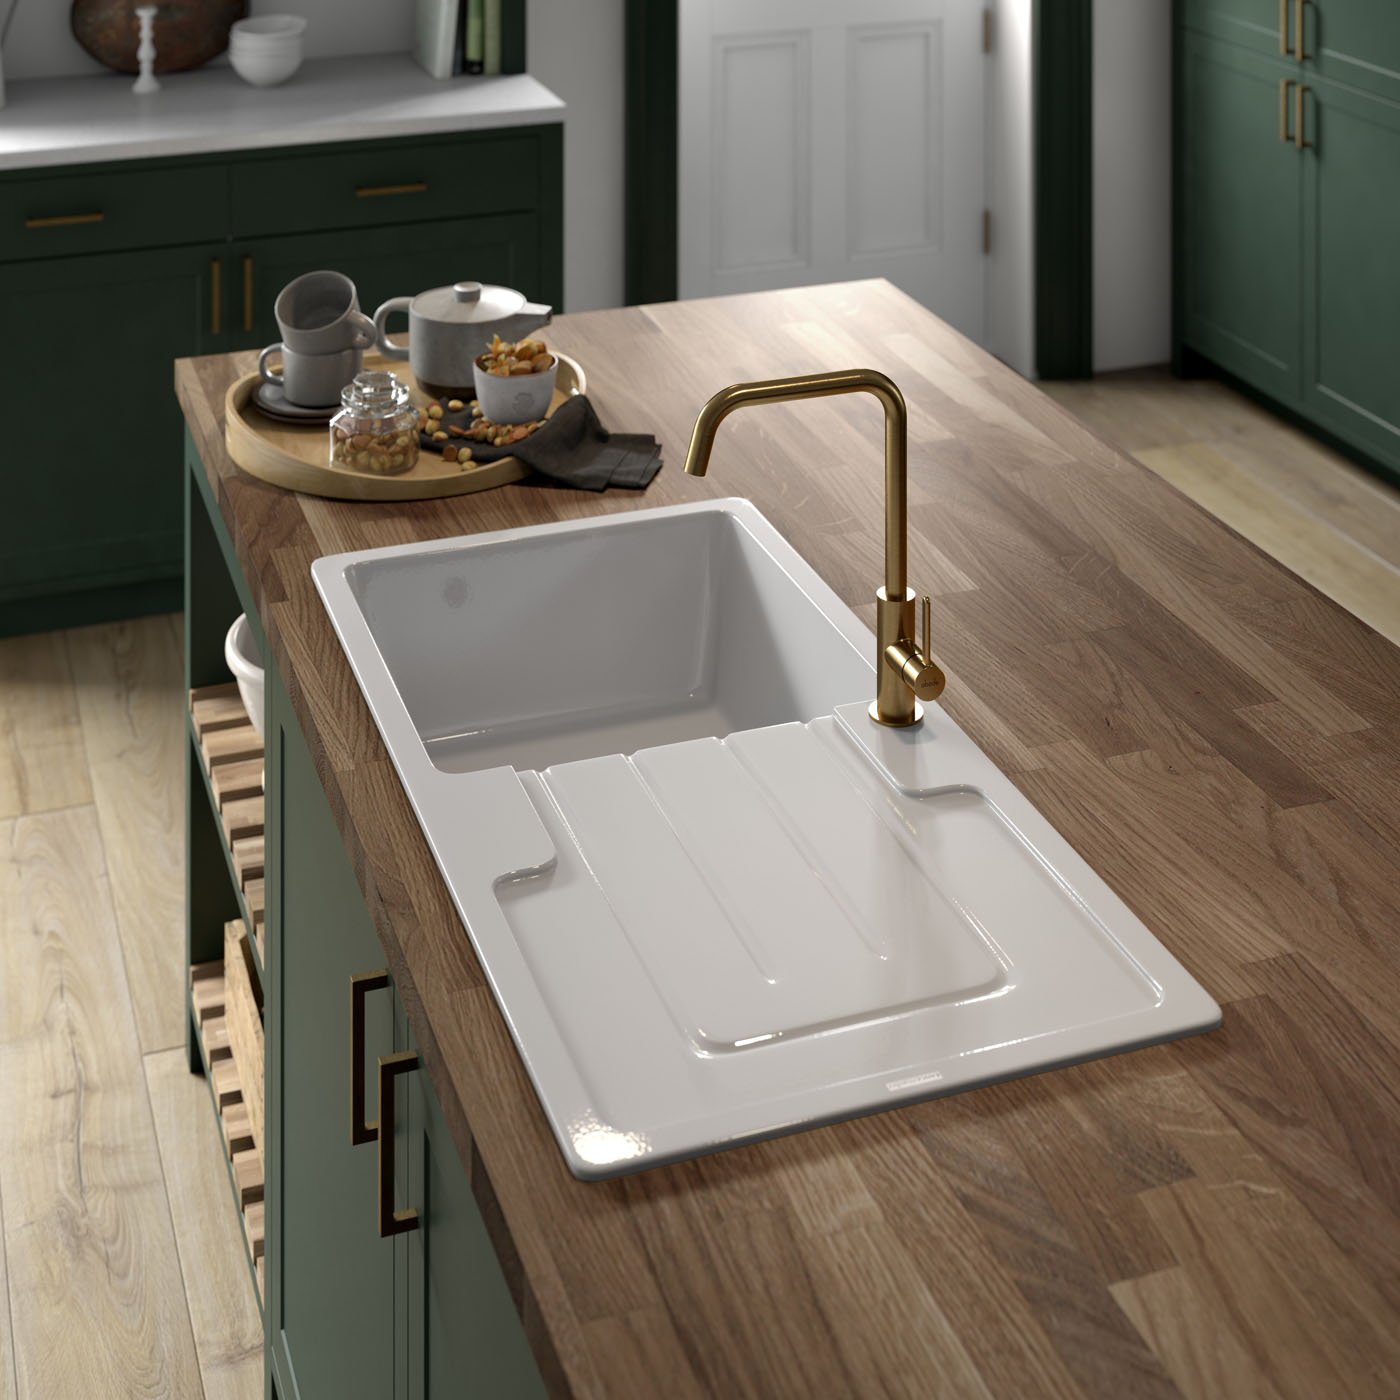 Marlow Sage Green  Benchmarx Kitchens & Joinery